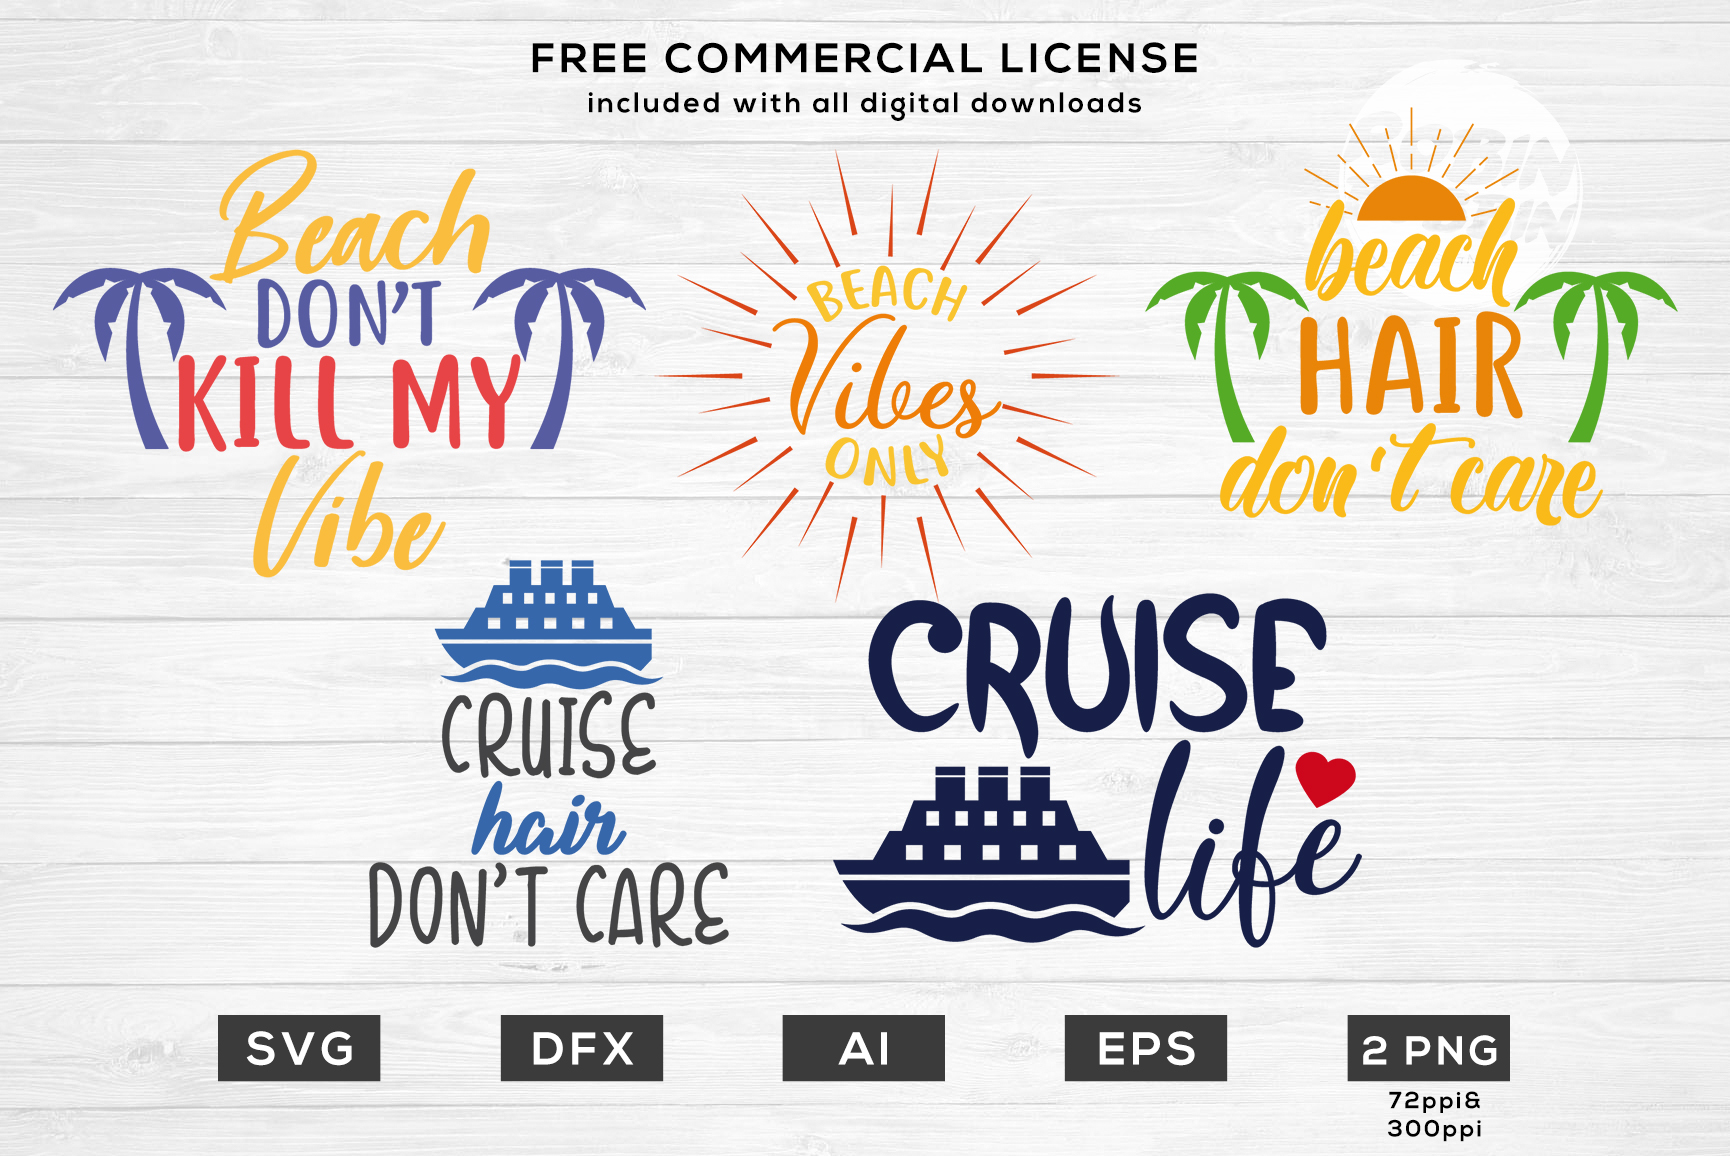 Download Summer Vibes Bundle of 15 Designs - SVG Files for Cutting